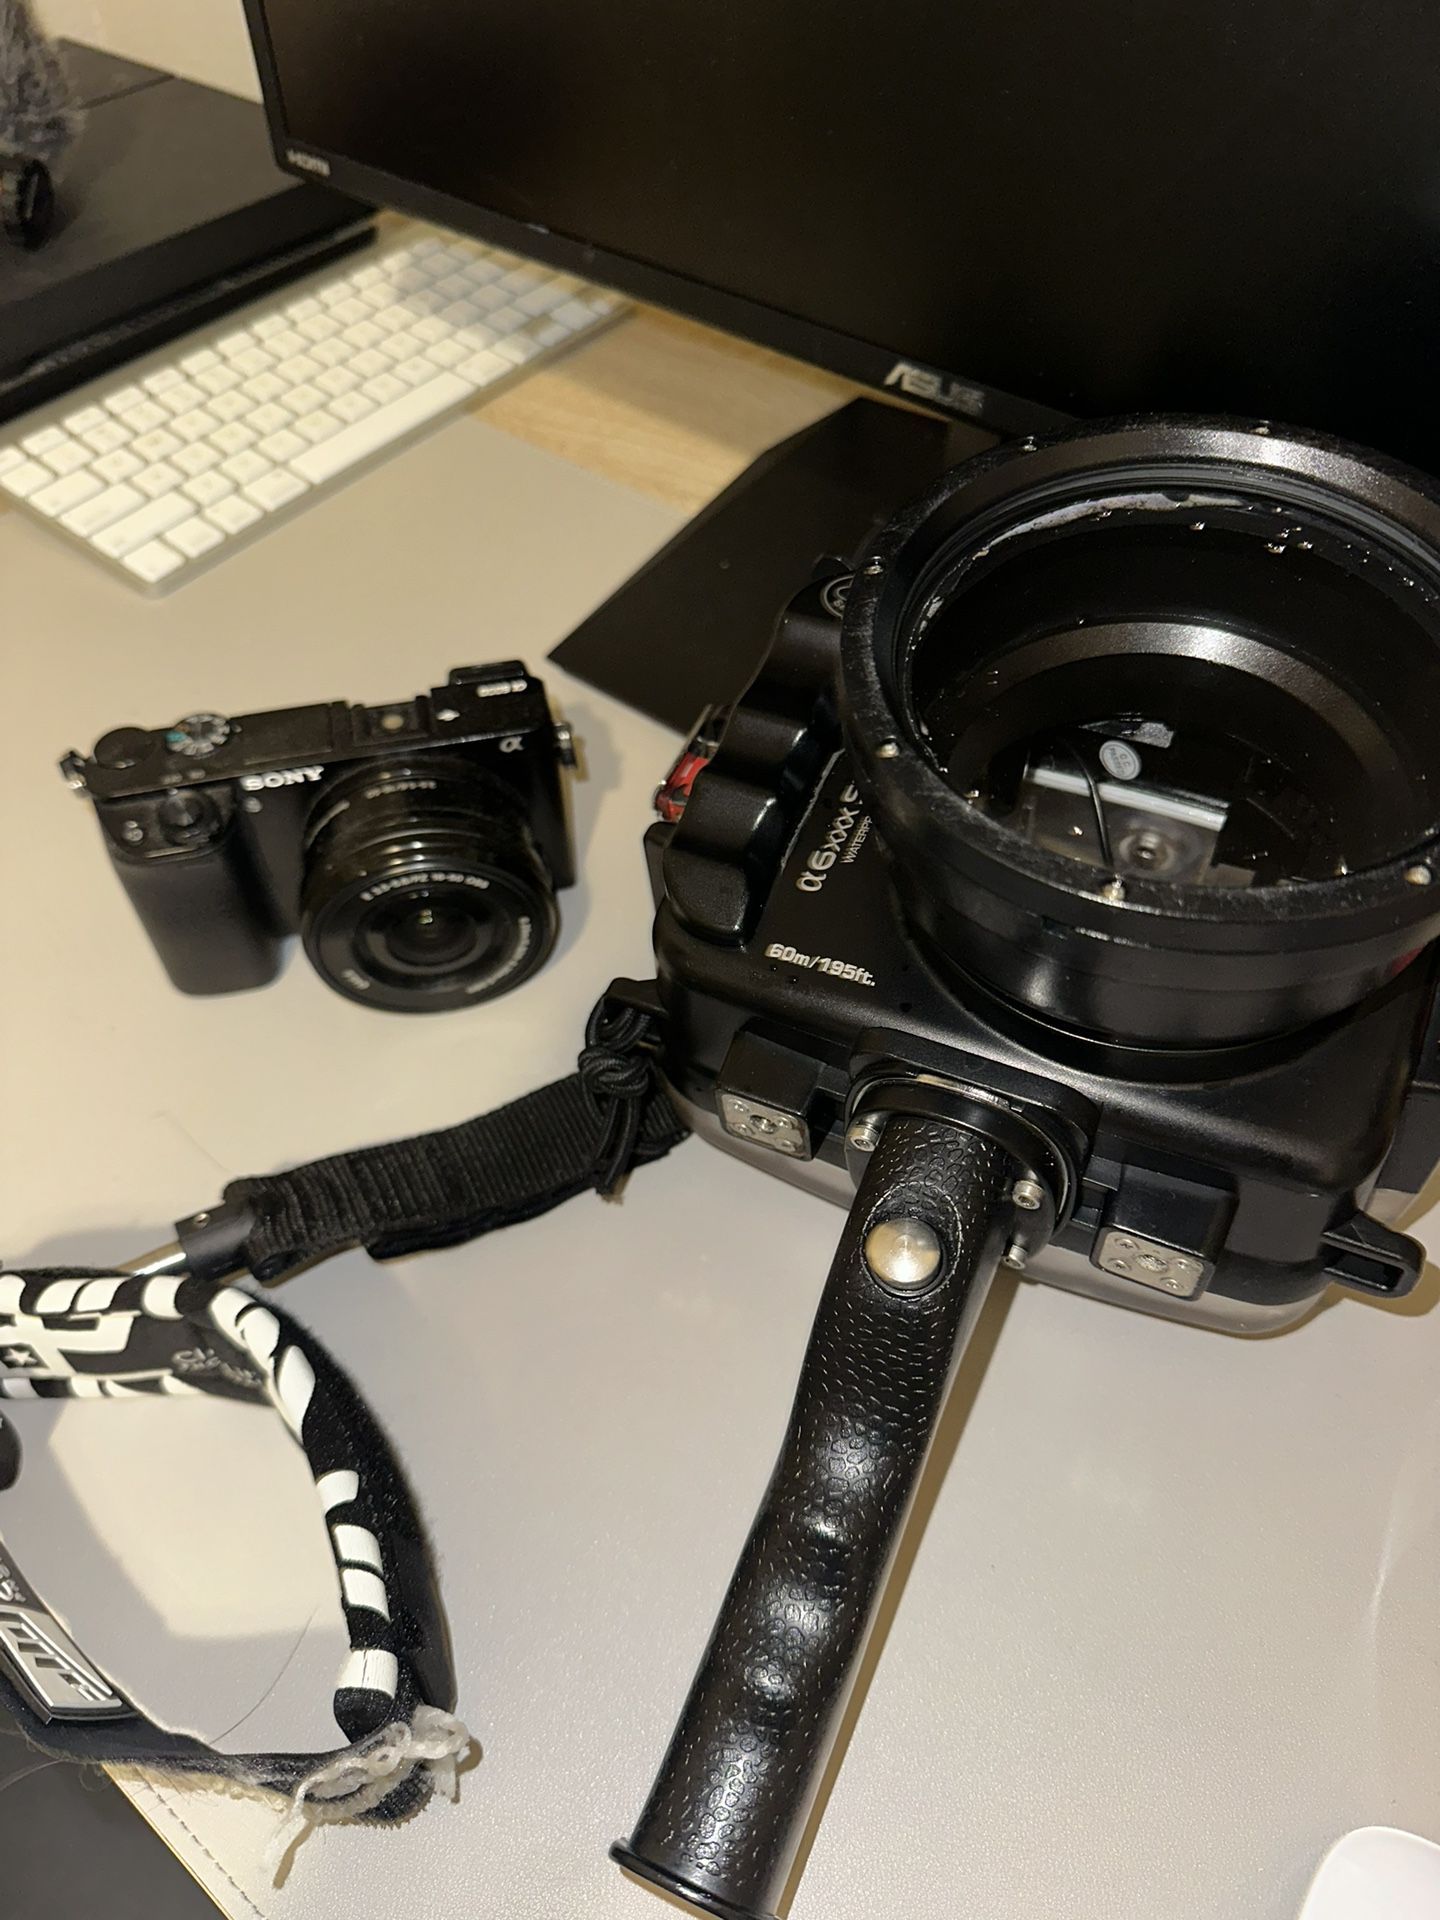 Sony A6000 with Underwater Housing